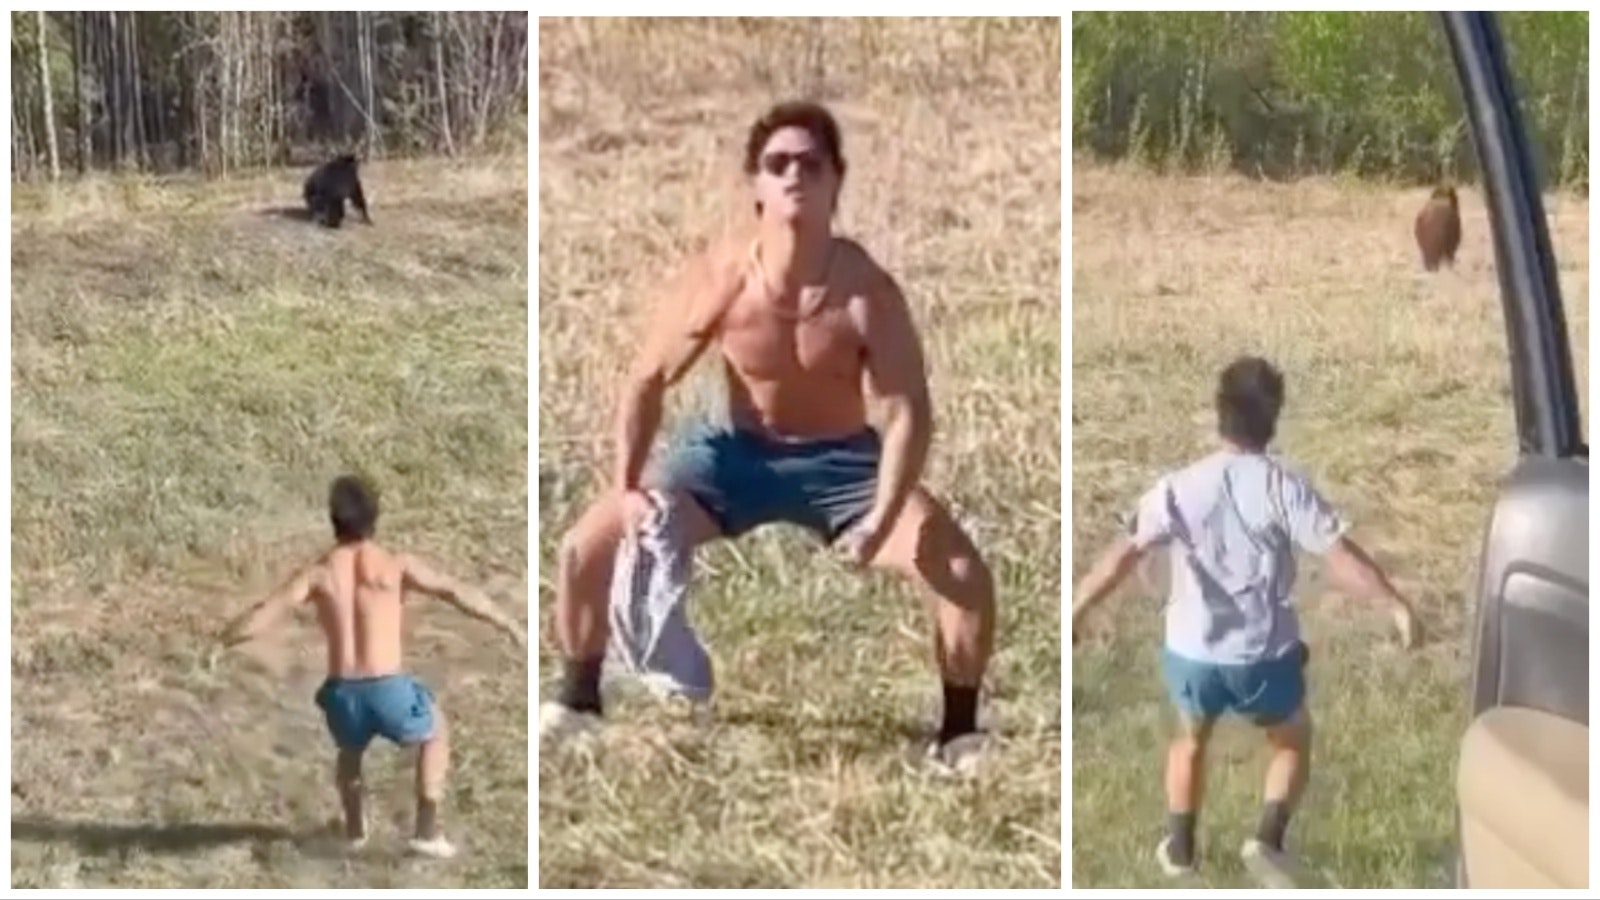 These images for a video show a man charging at a bear in Yellowstone, then flexing after the bear ambles off.